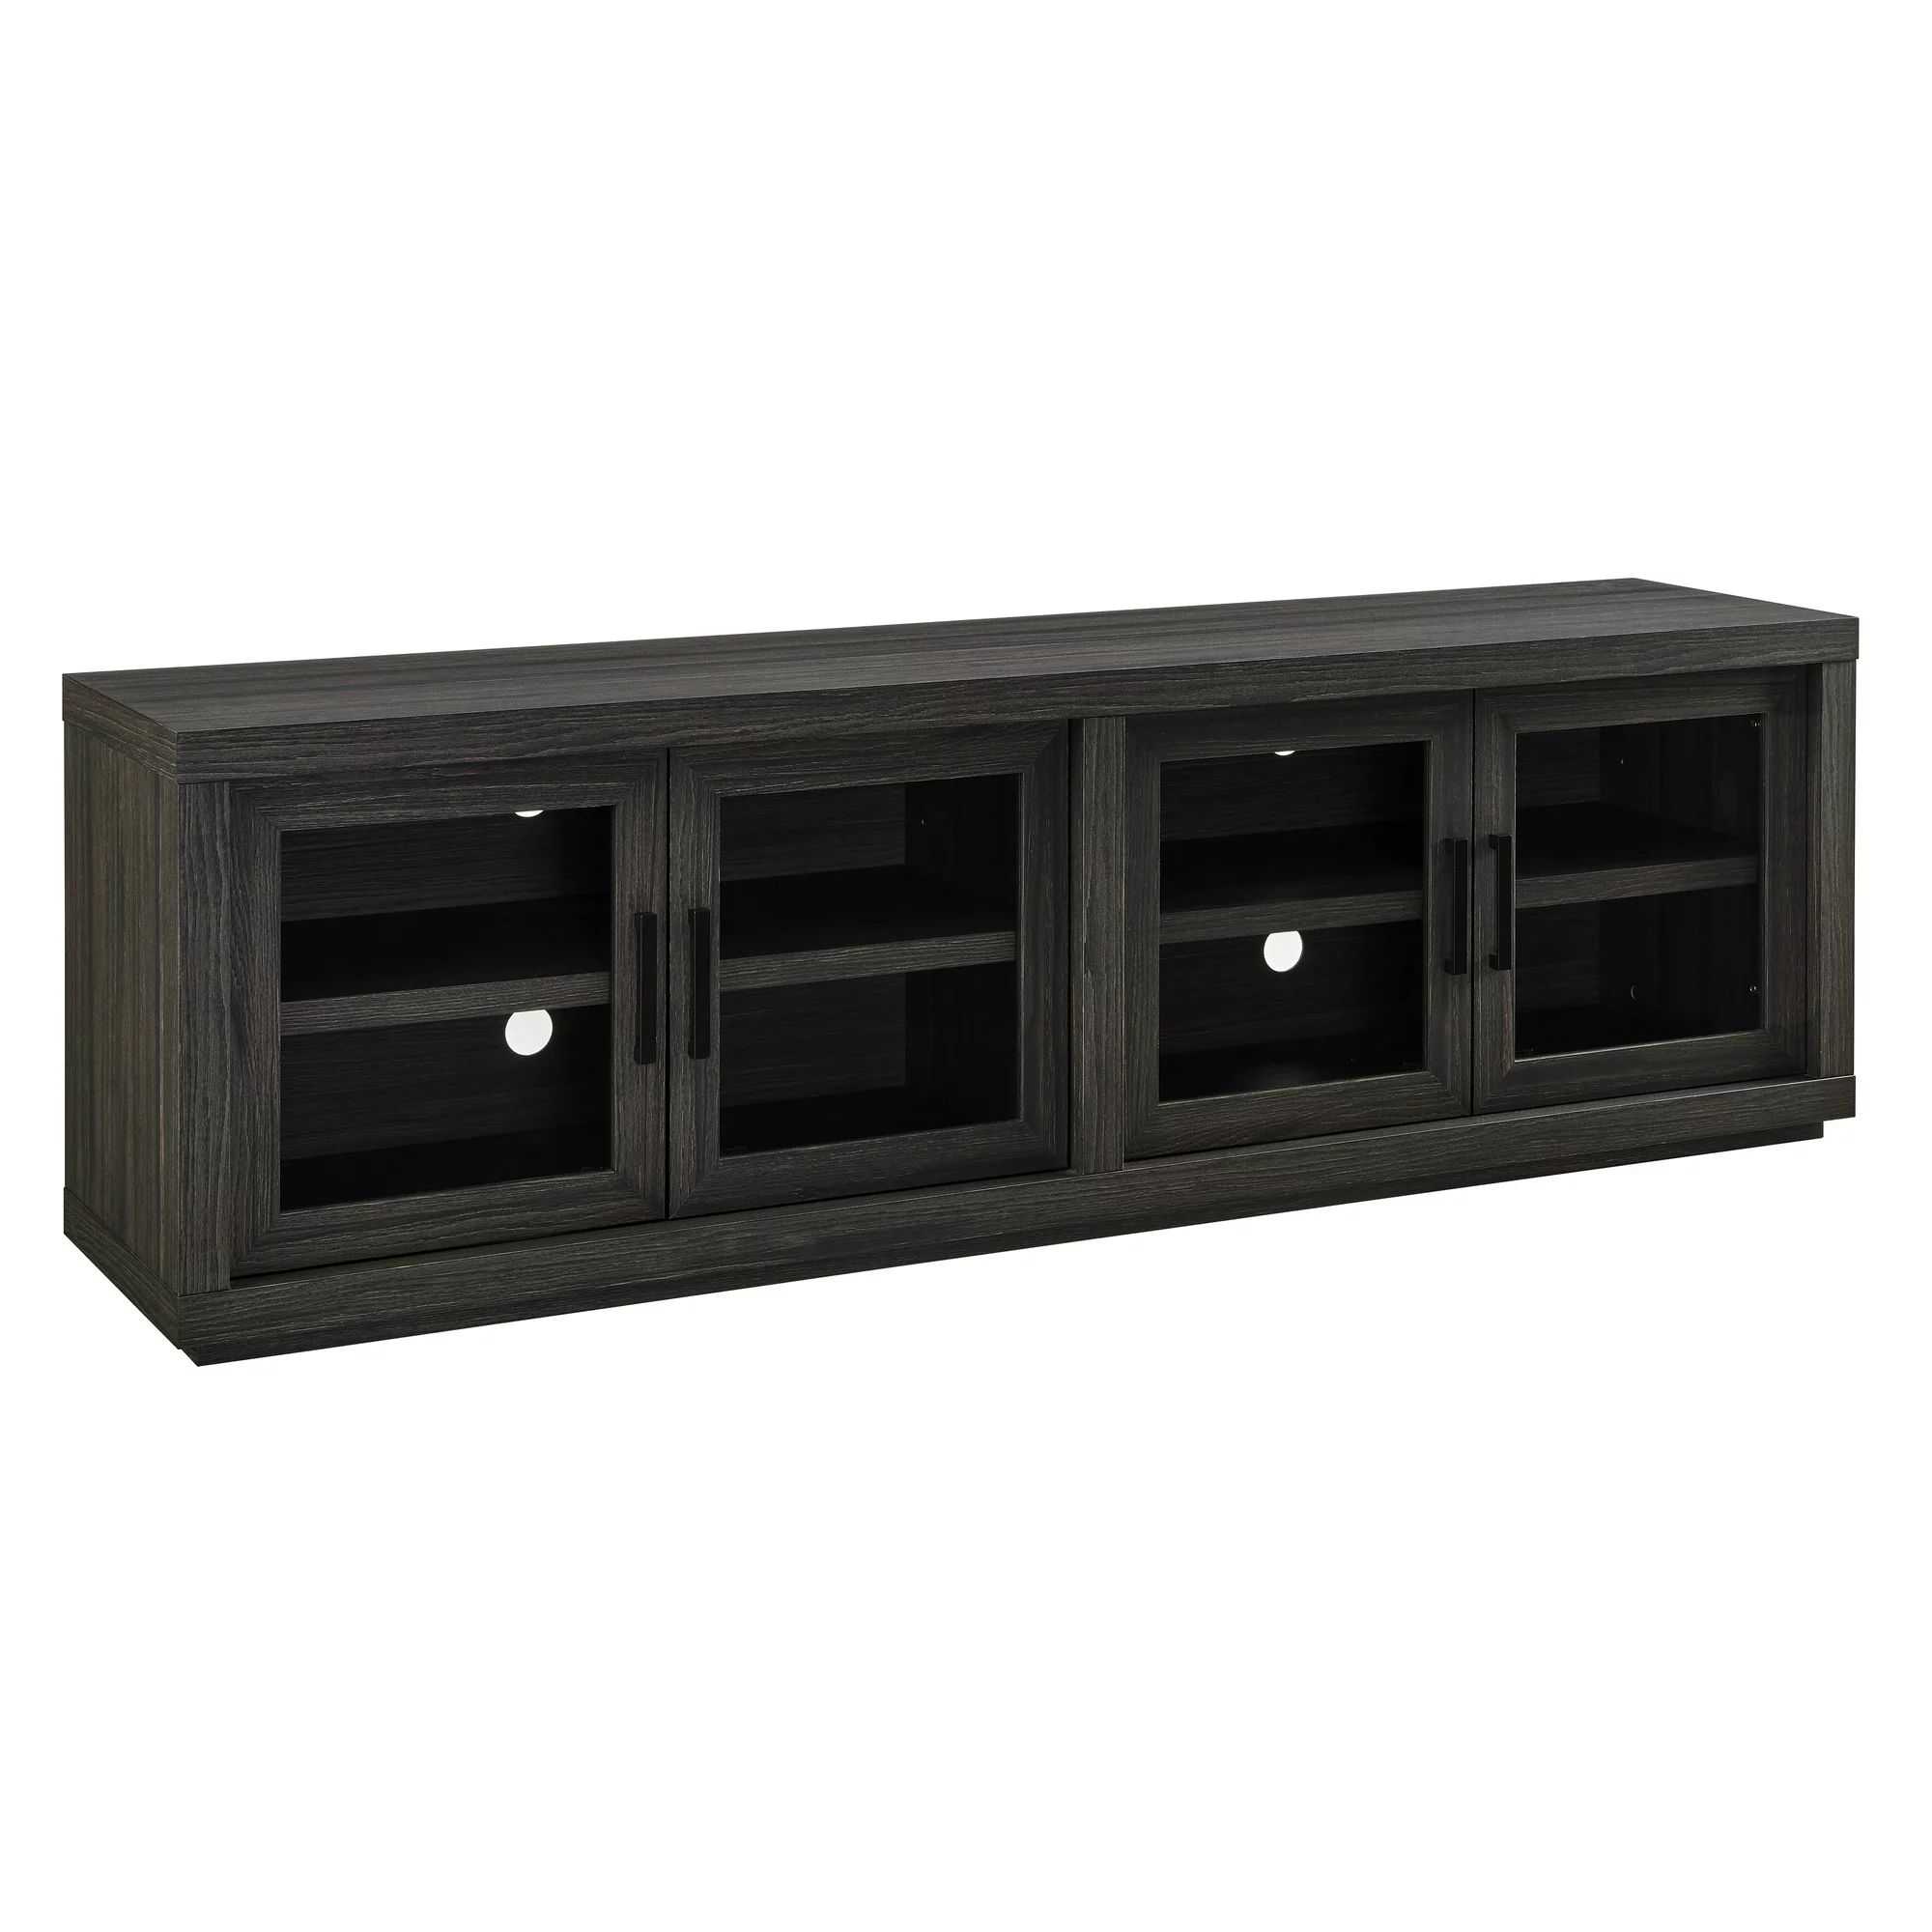 Better Homes & Gardens Steele TV Stand for TVs up to 80", Espresso | Walmart (US)